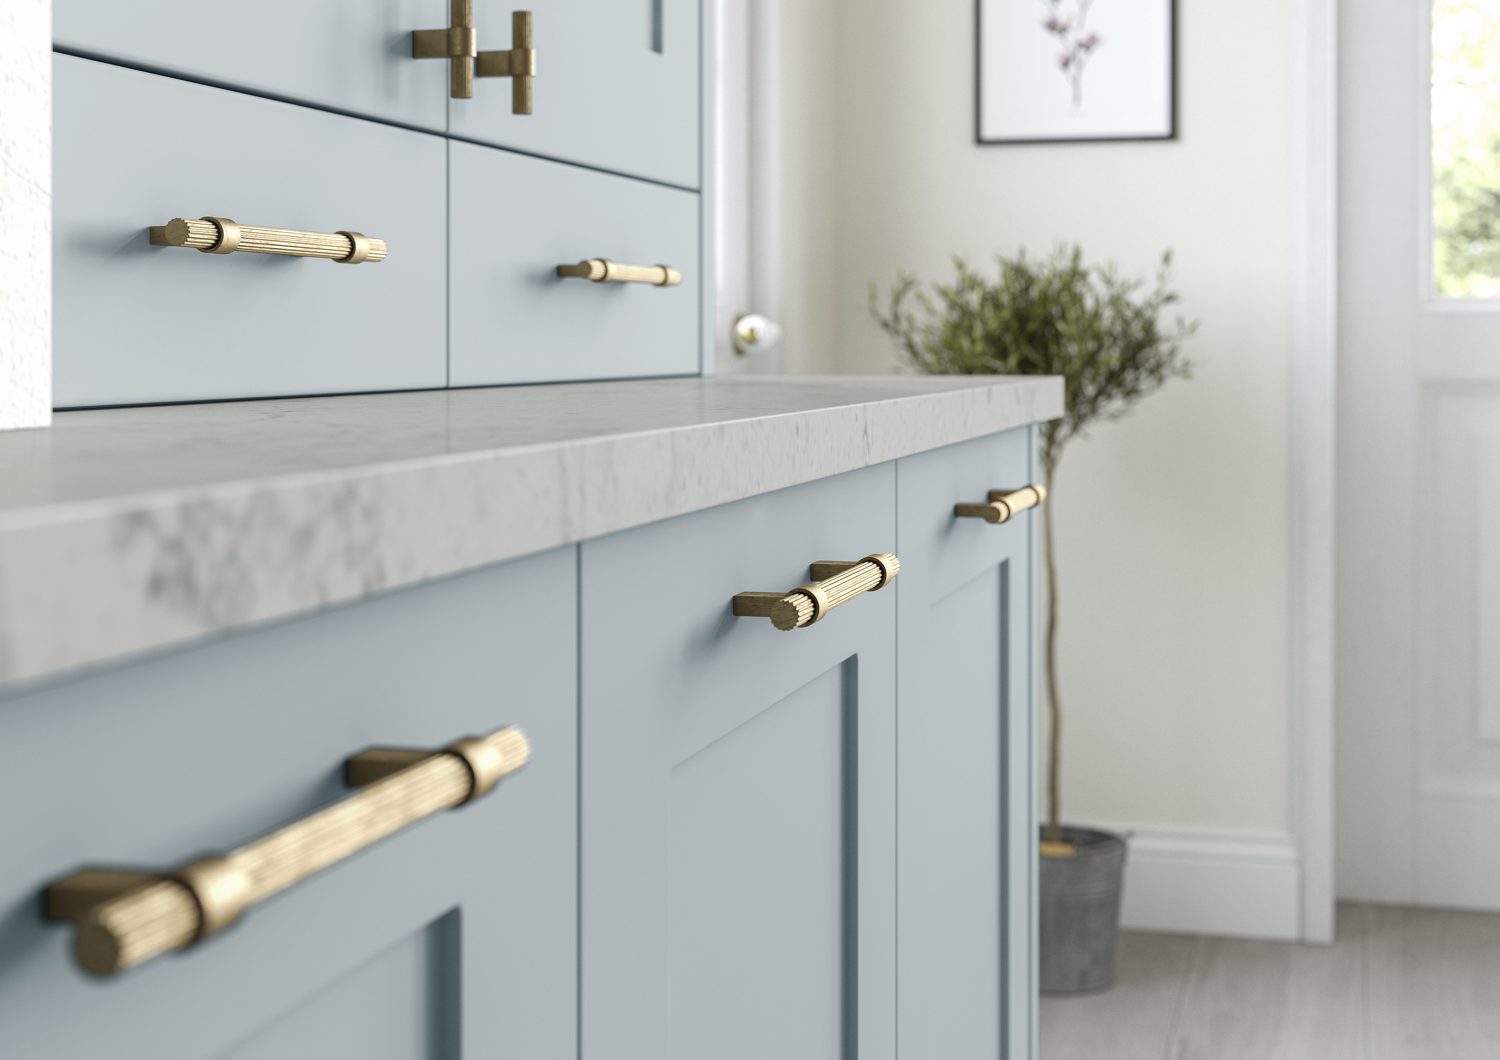 Georgina Pantry Shaker Door by The Kitchen Depot with Gold handles